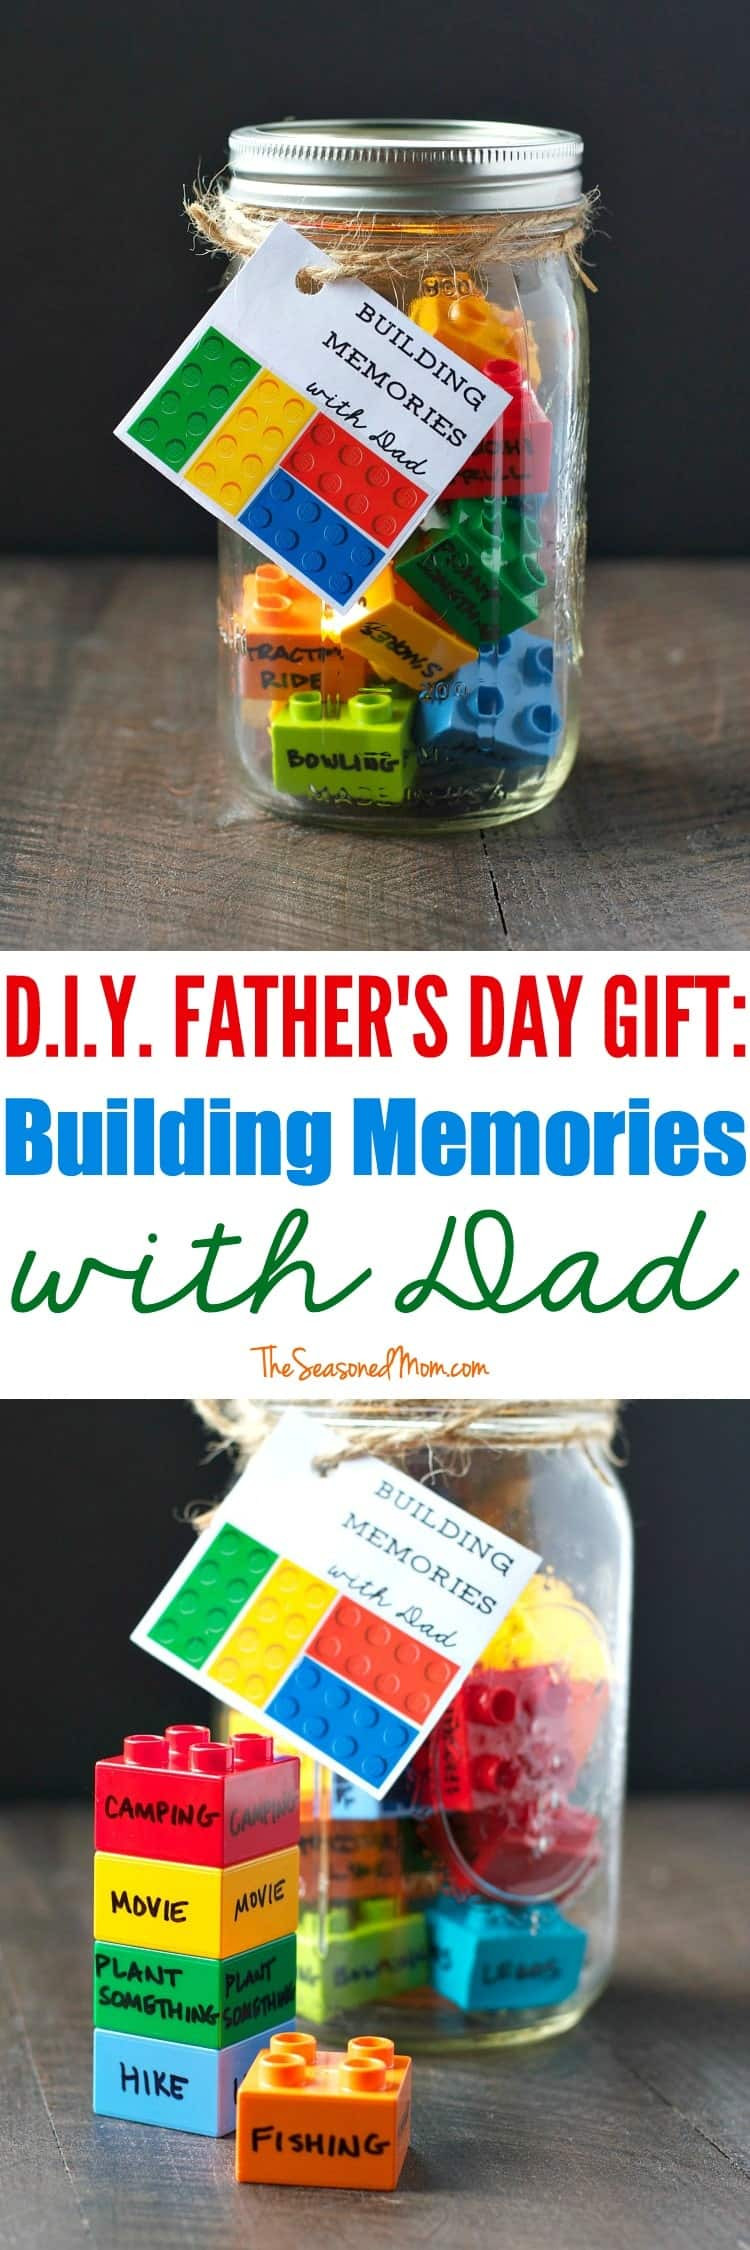 Fathers Day Diy Gifts
 DIY Father s Day Gift Building Memories with Dad The